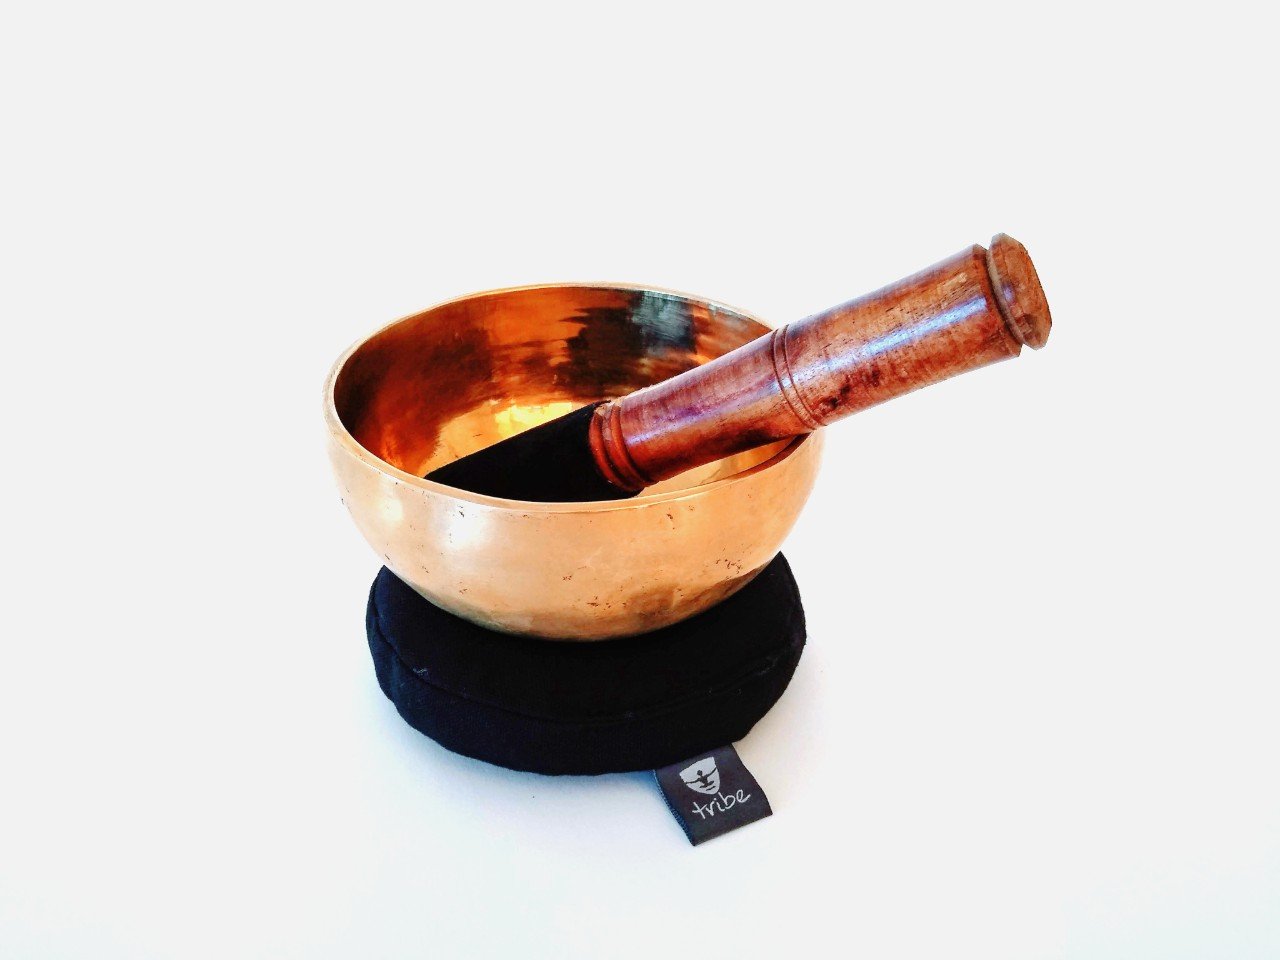 Tibetan Singing Bowl - brass bowl sitting on cotton pad with wooden striker inside bowl - TRIBE | Eco Yoga Store